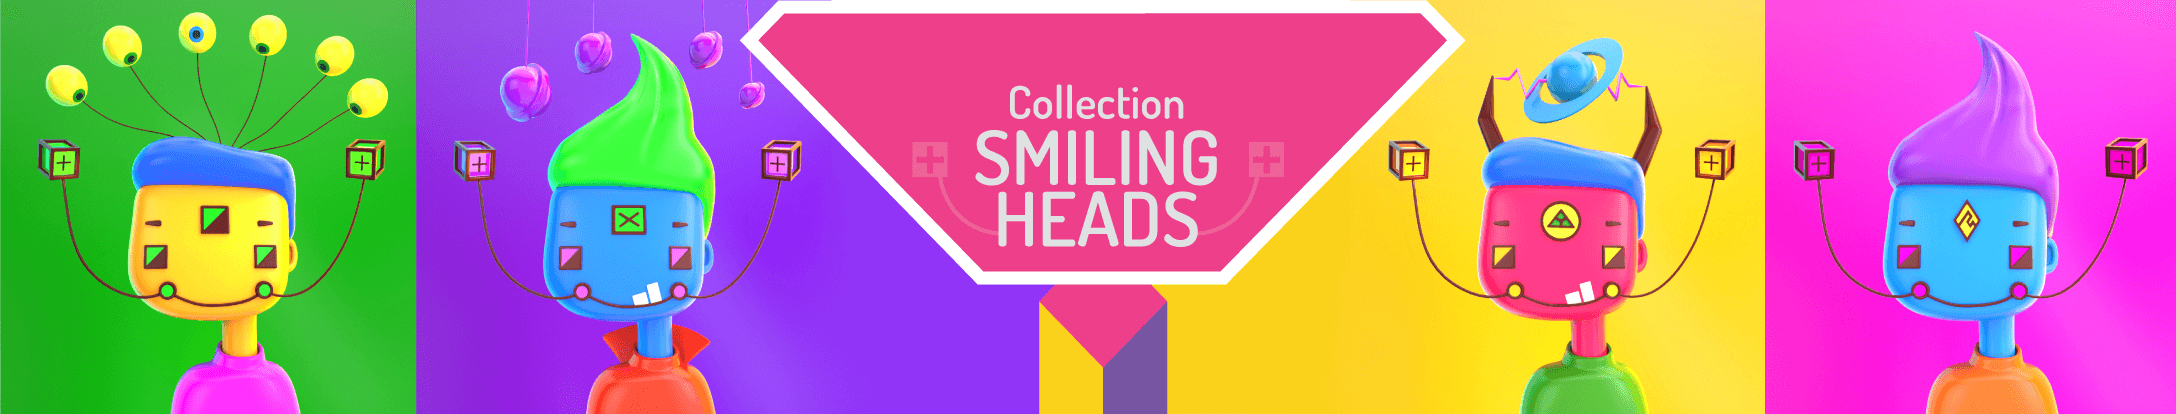 Smiling Heads